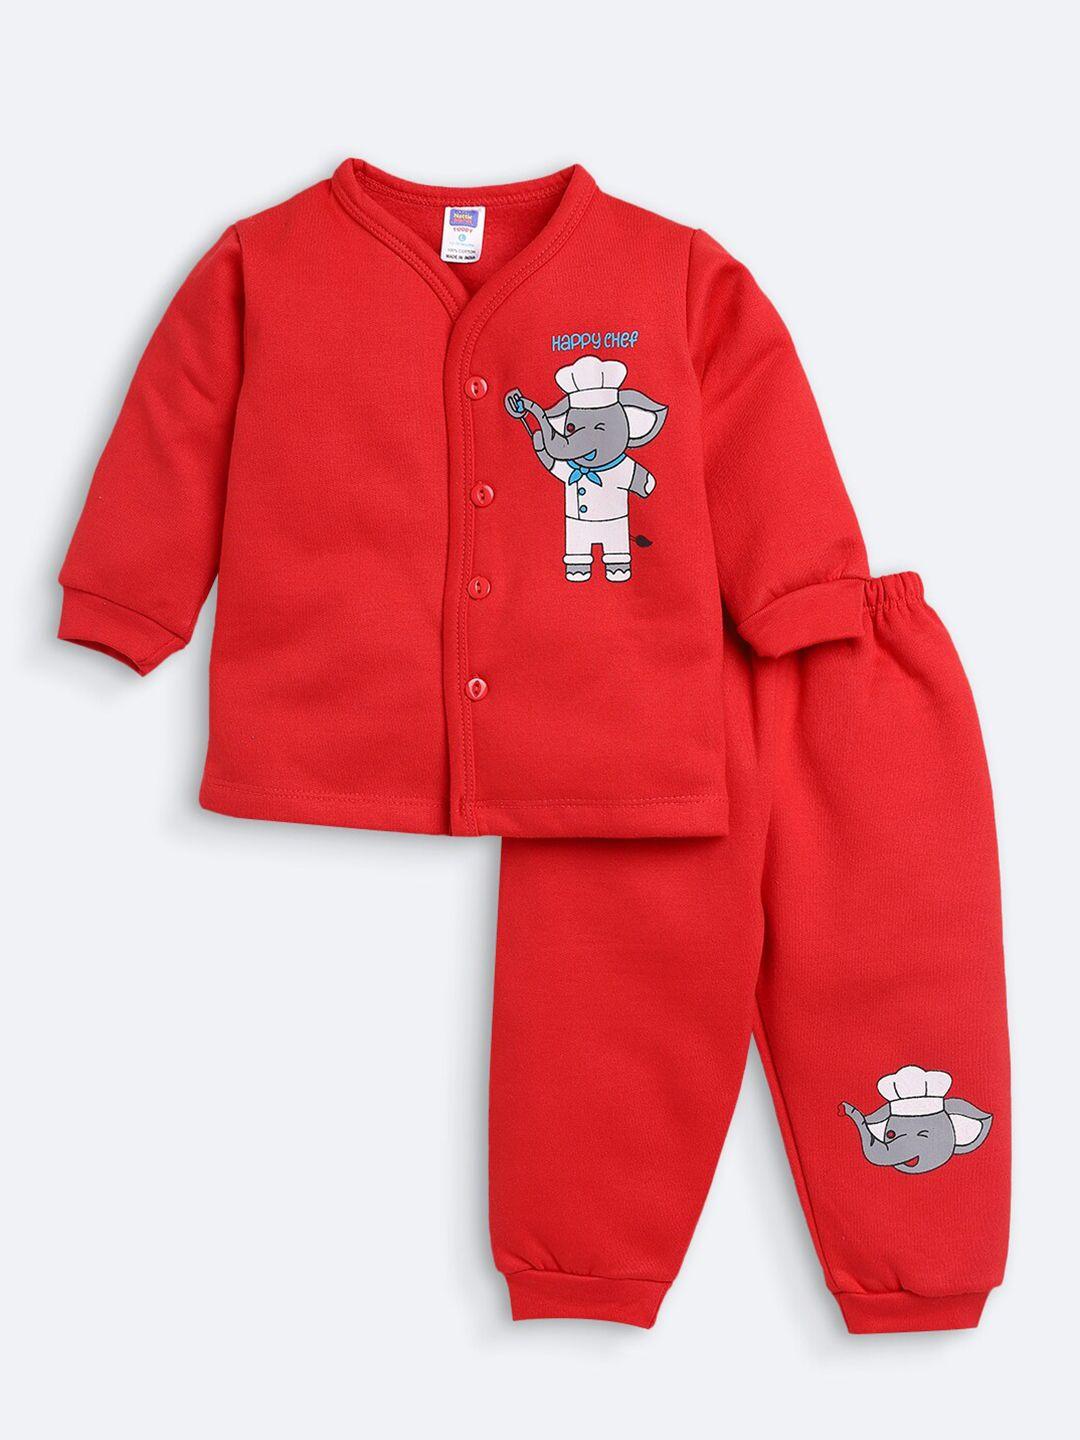 nottie planet kids red & white printed pure cotton clothing set